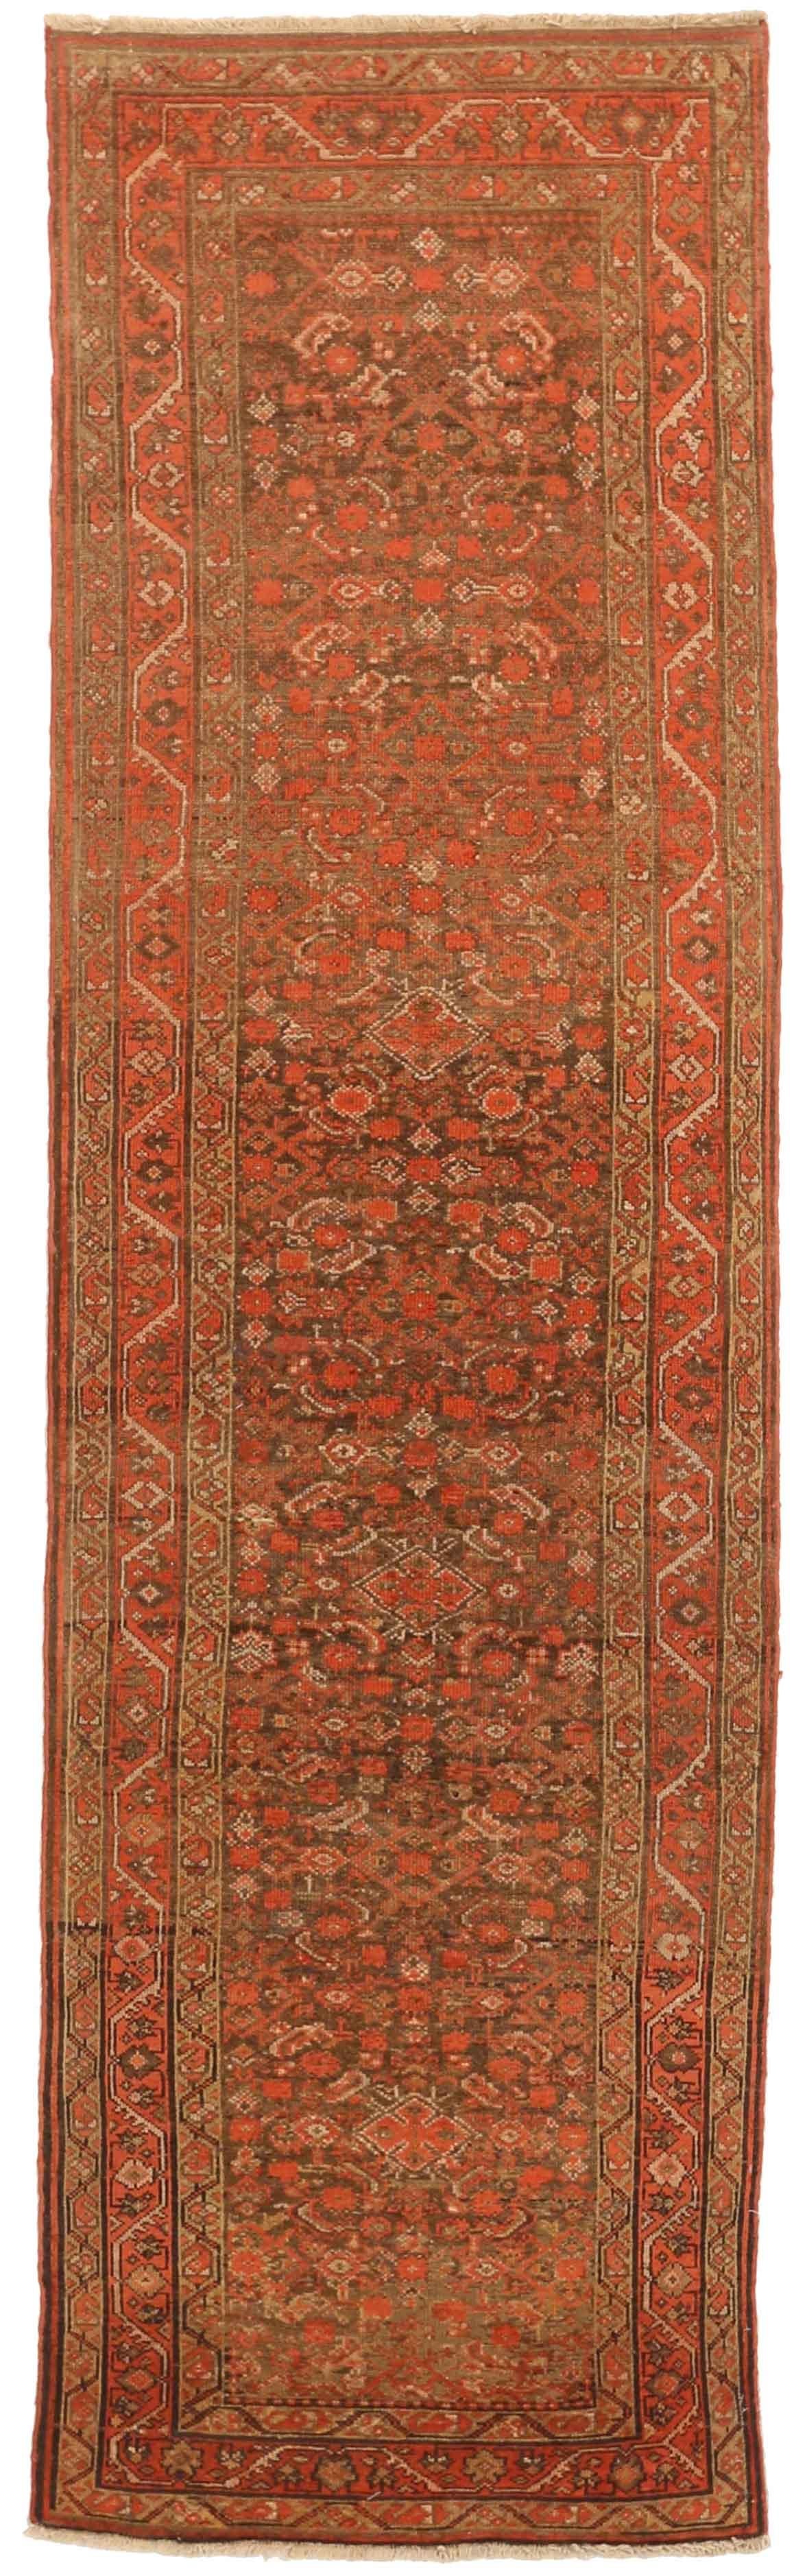 Handwoven antique Persian rug made in the 1910s using Malayer design patterns. It's a deep brown and red color motif is a bold but beautiful choice for traditional and midcentury home interior themes. This antique Persian rug has a 2’6” x 9’4”